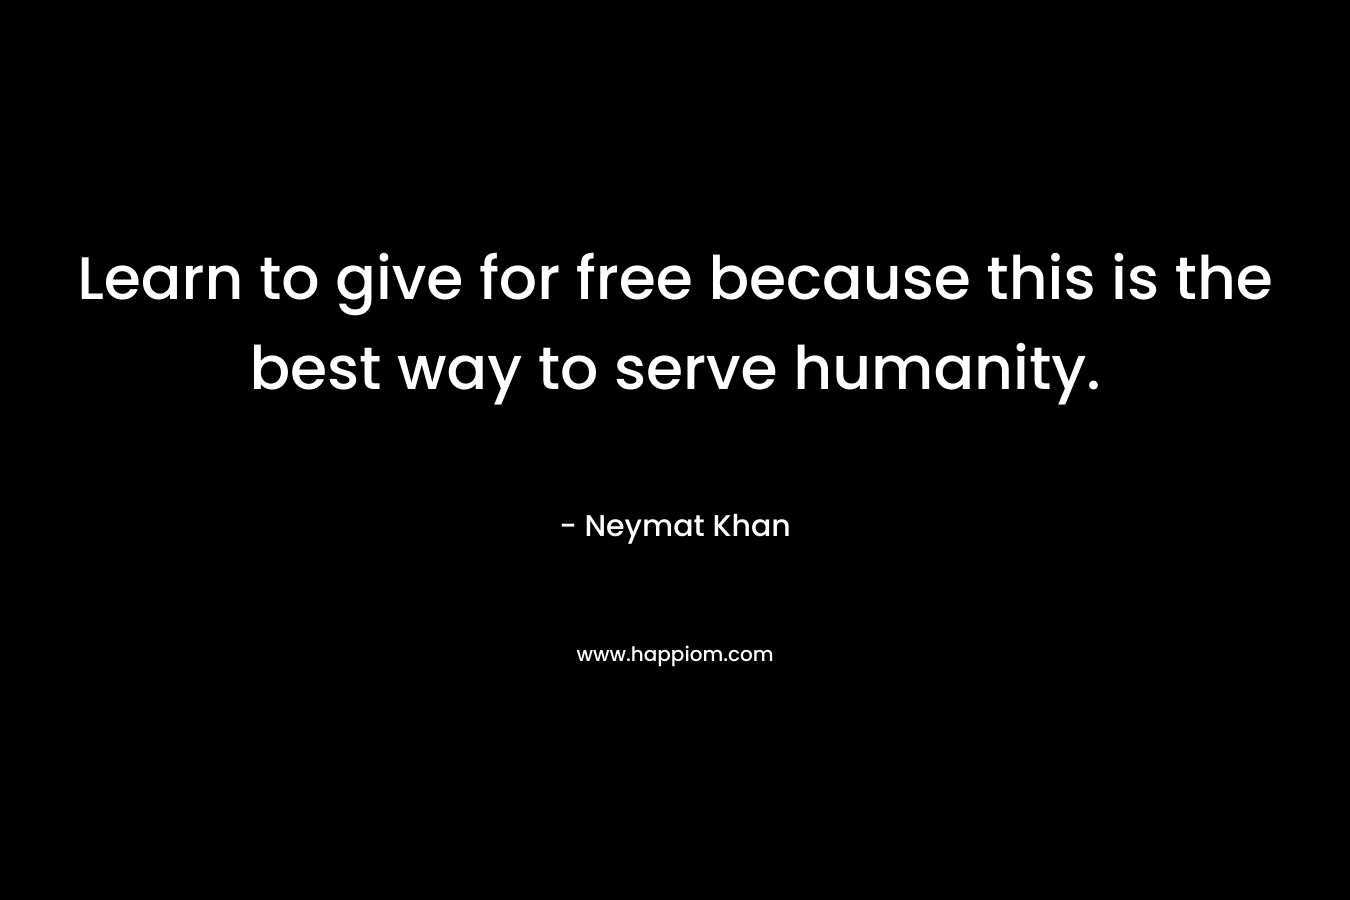 Learn to give for free because this is the best way to serve humanity.